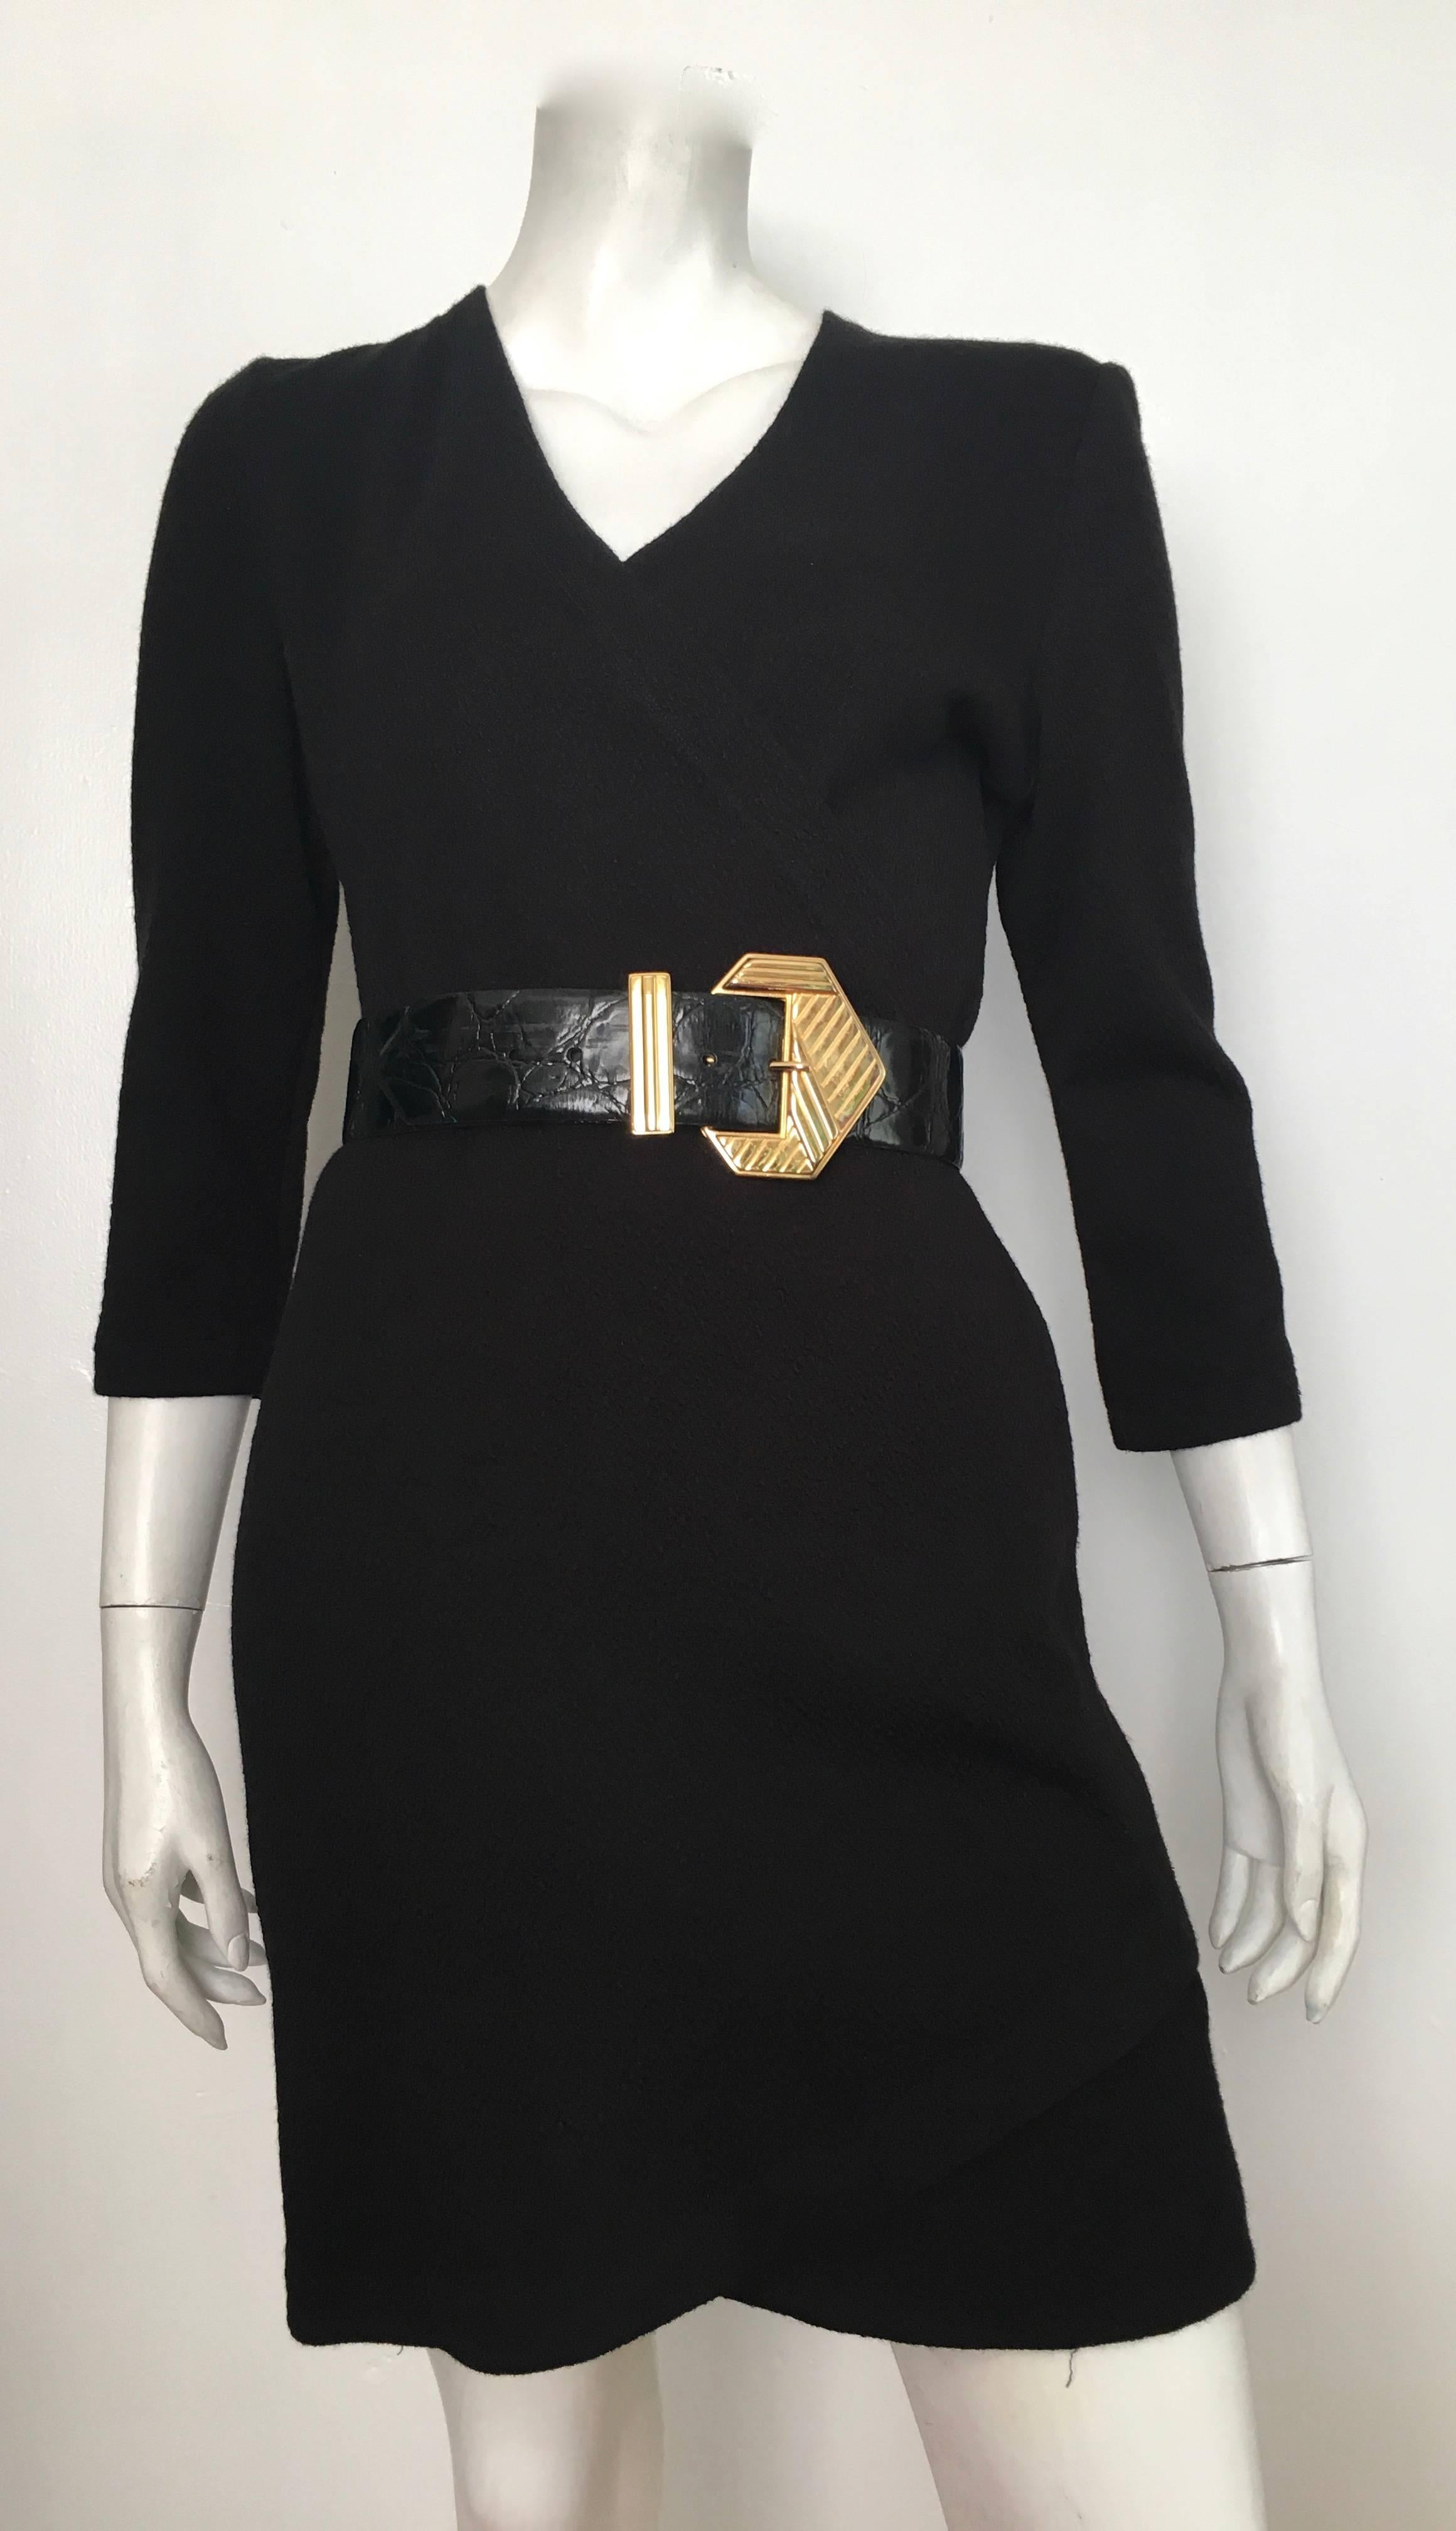 Patrick Kelly Paris 1980s classic little black dress will fit a size 6 / 8.  Ladies to make sure this dress will fit your lovely body please grab your tape measure and measure your bust, waist & hips to make certain this will fit your body if are